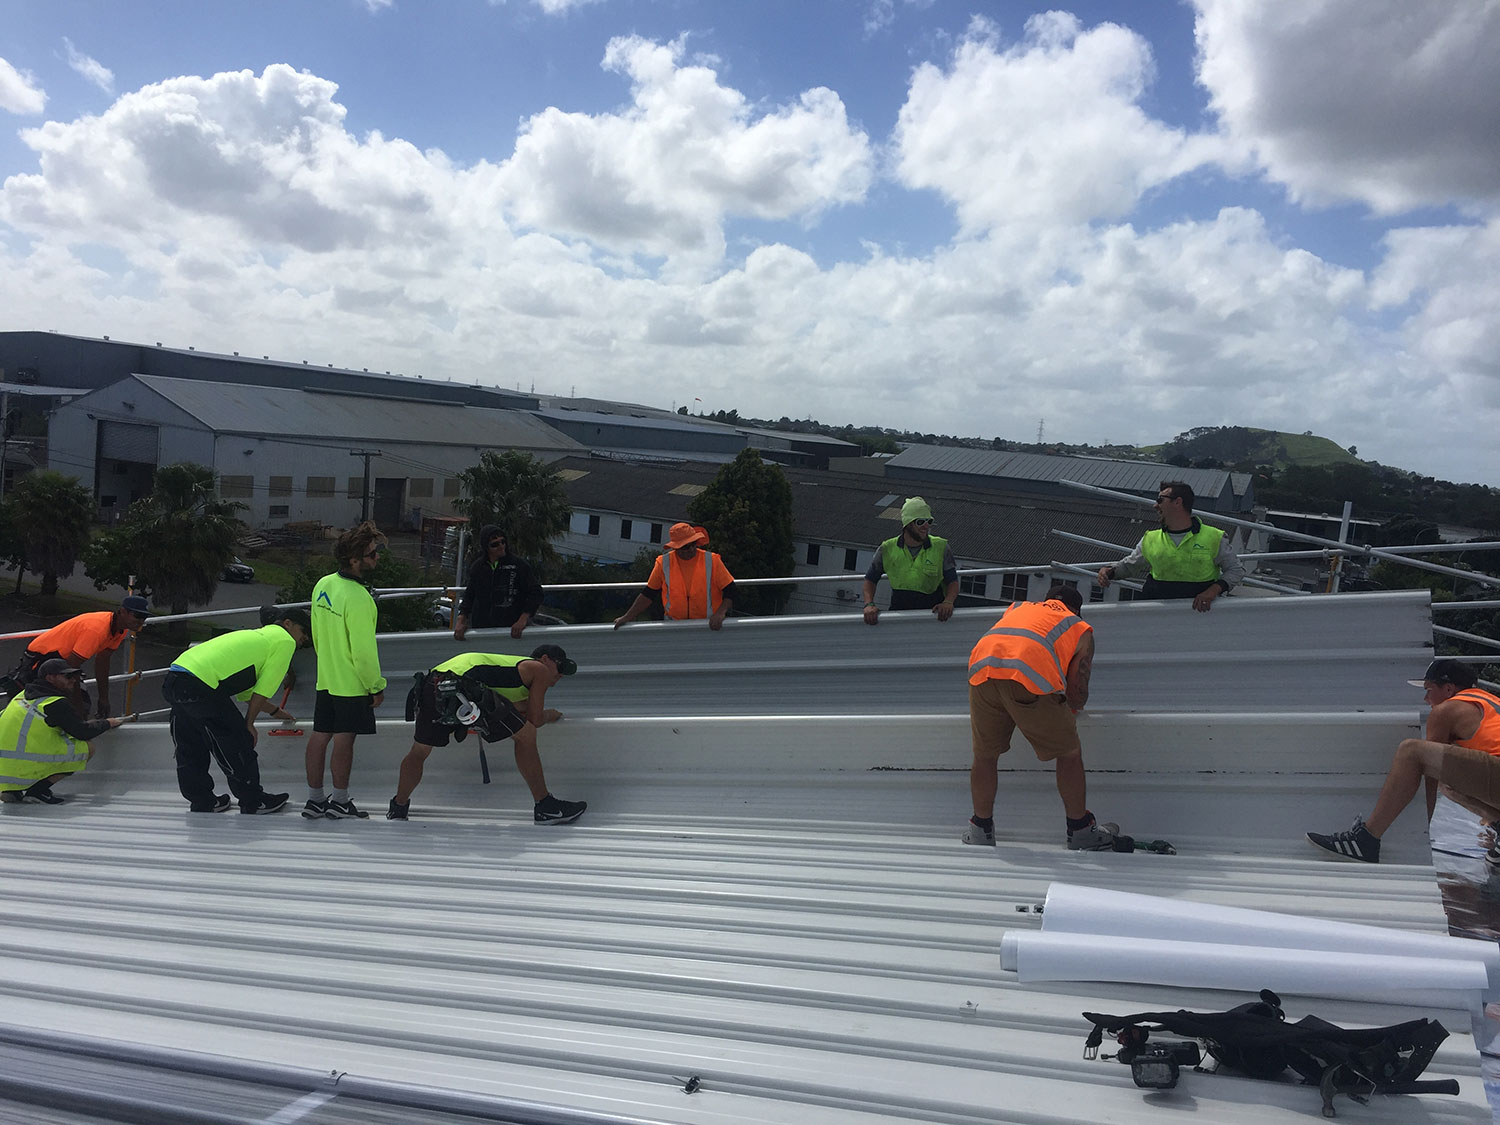 auckland roofing solutions services auckland and new zealand wide new roofs repair cladding and more Project gallery 38